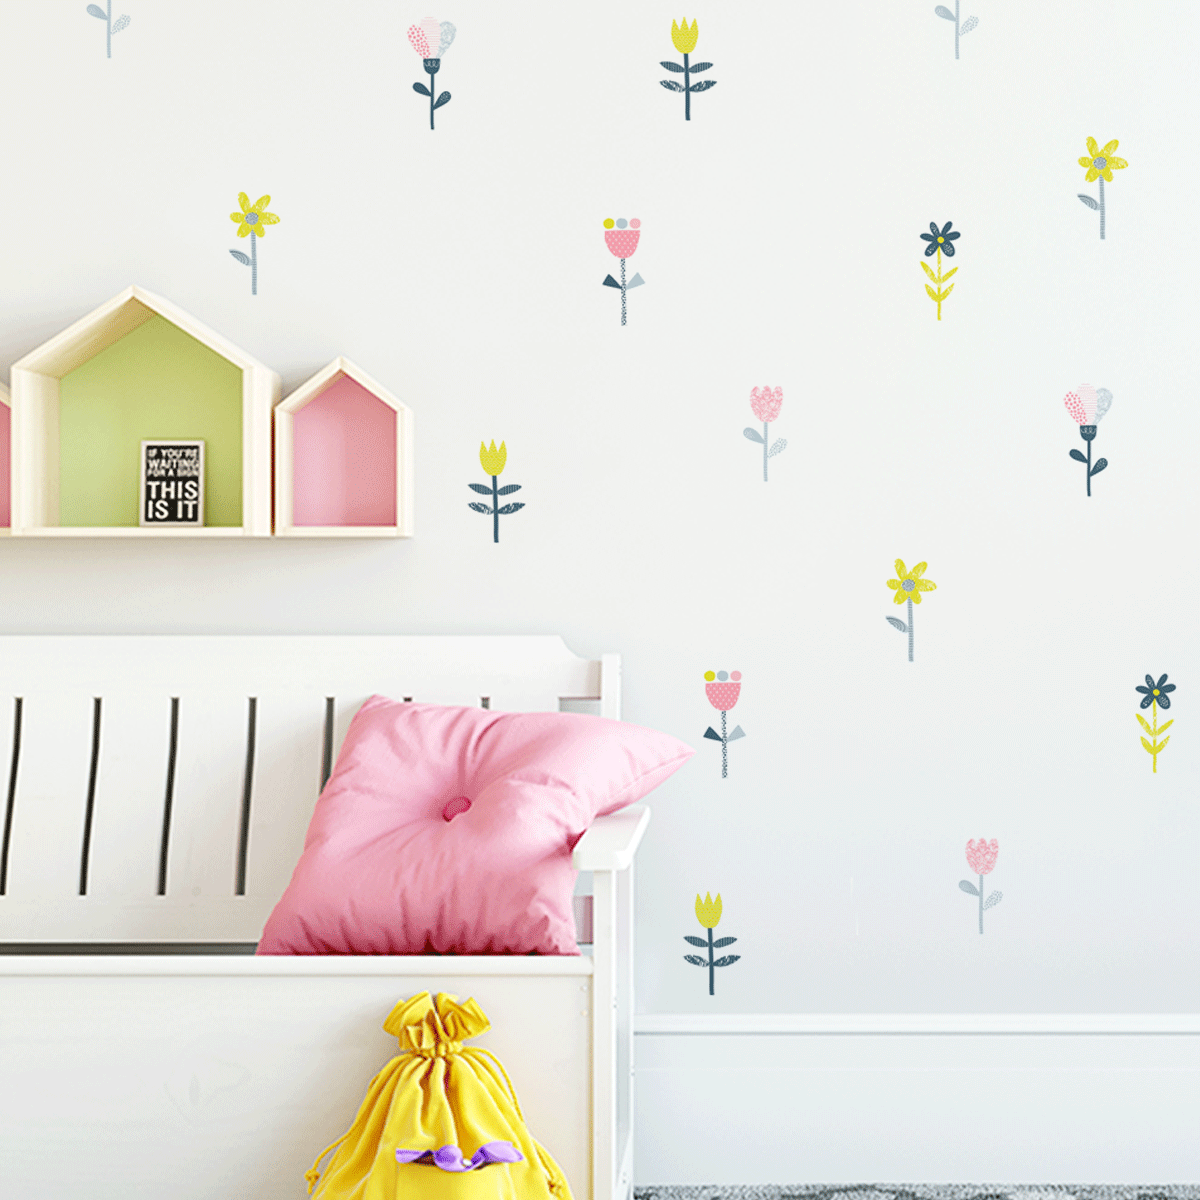 Wall sticker, wall decal, home decoration, wall design for nursery and kids bedroom, flower wall stickers